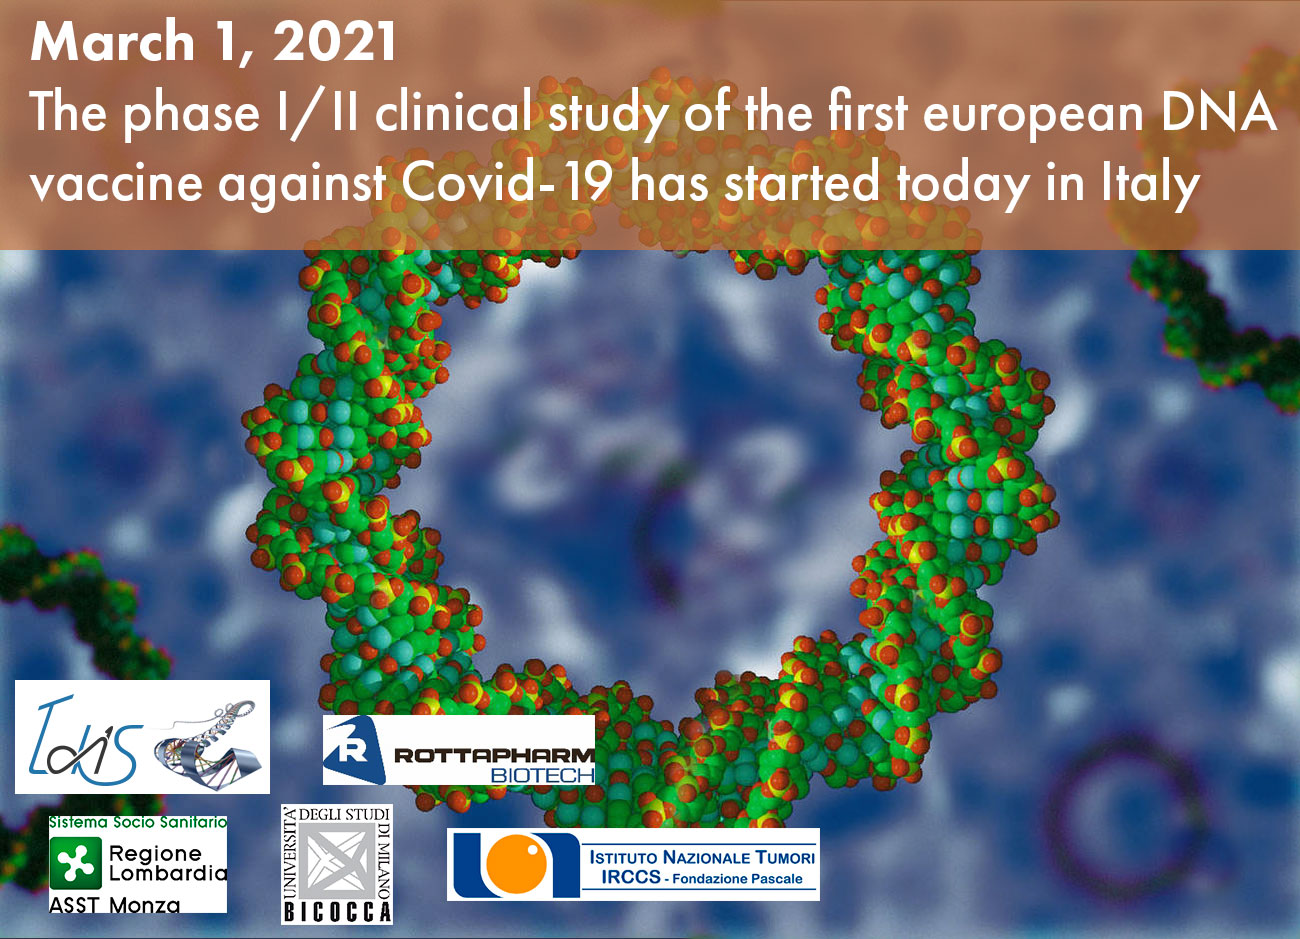 The phase I/II clinical study of the first european DNA vaccine against Covid-19 has started today in Italy